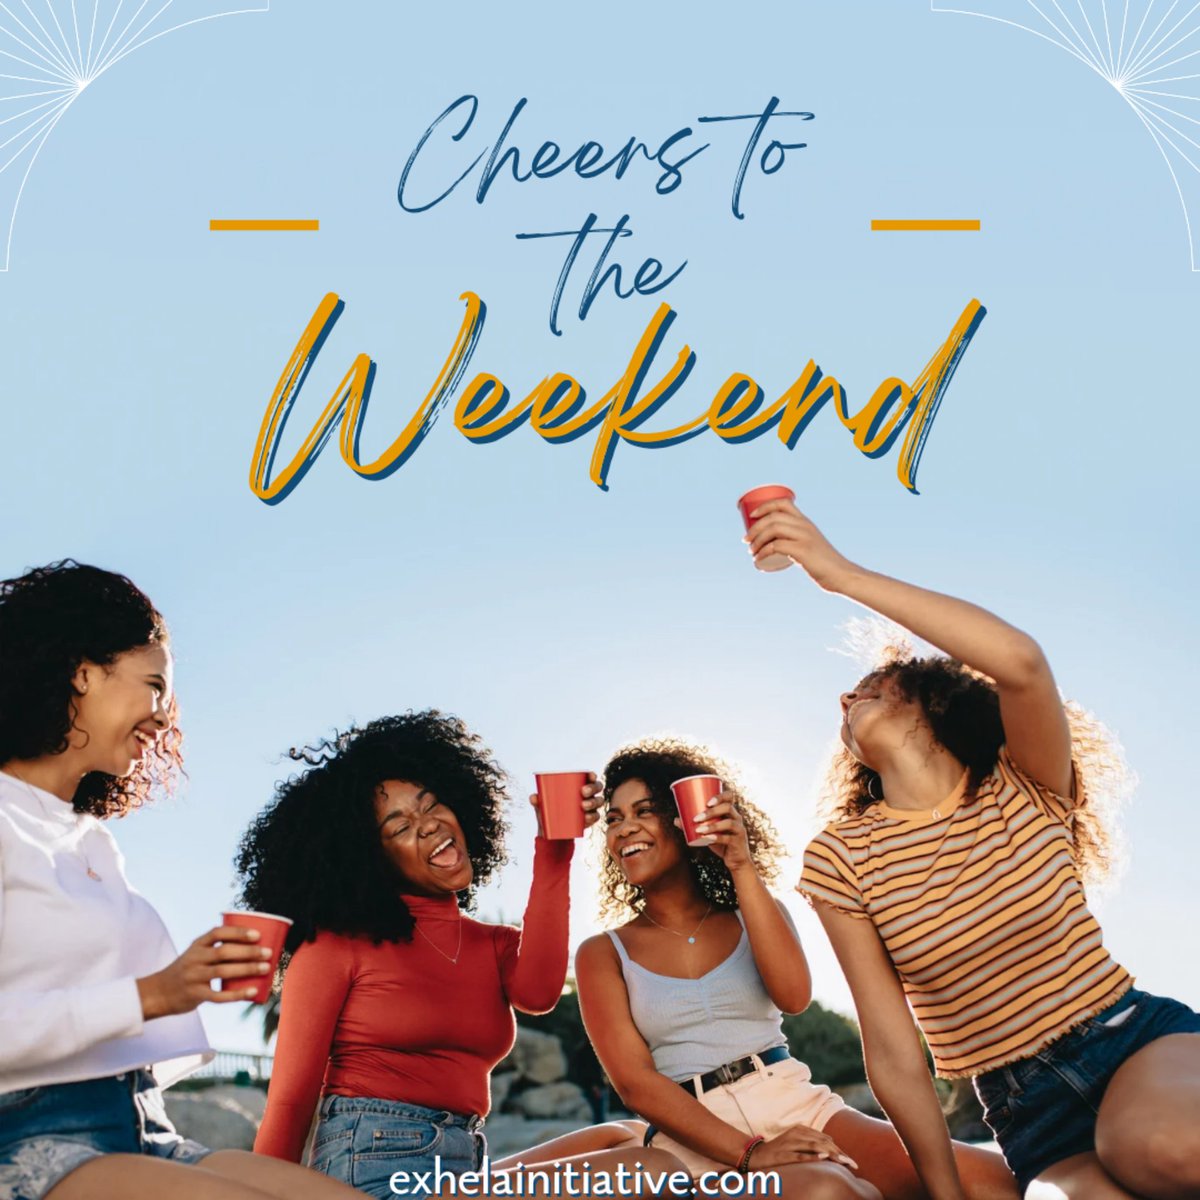 Did you know?
Maintaining good relationships with your friends and family, reduces harmful levels of stress, and boosts your immune system. 

Cheers to the weekend!
Cheers to healthy living!

#livewell #healthylife #liveandlove #exhelainitiative #wellness #theweekend